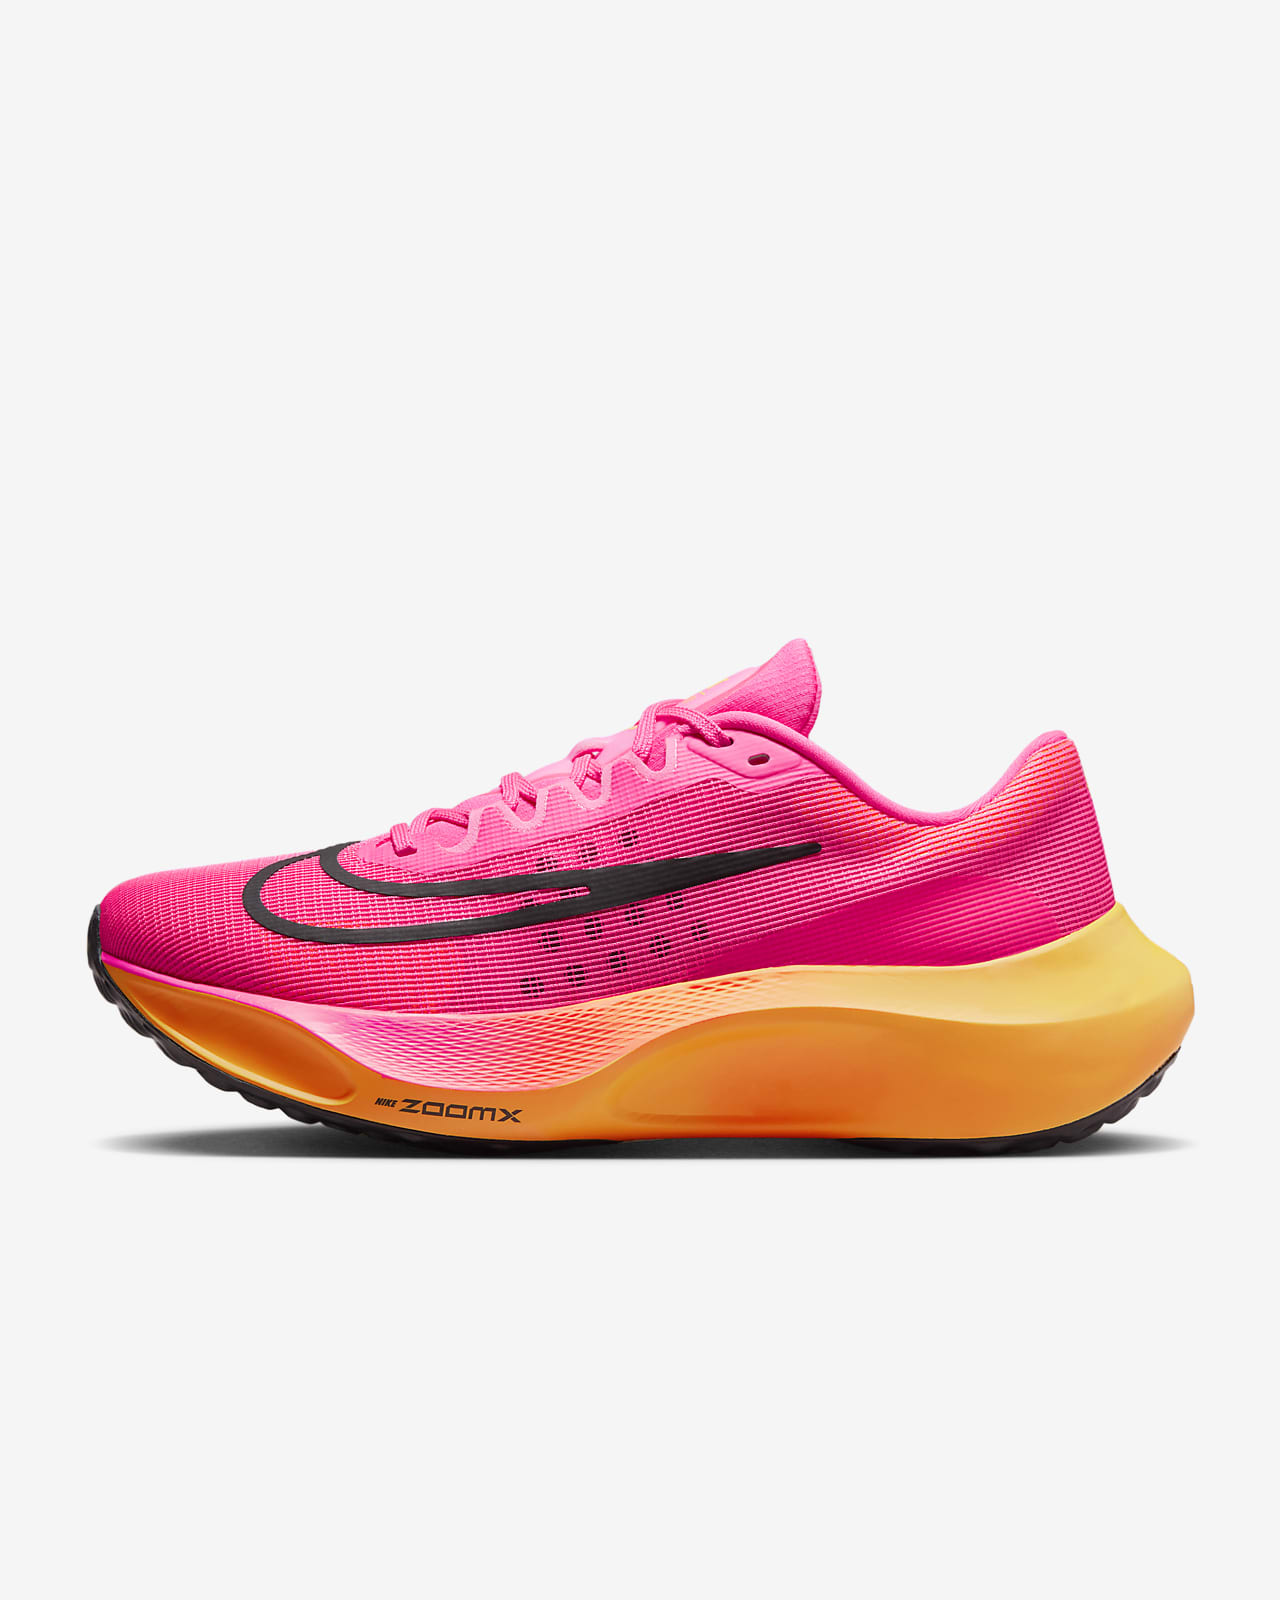 Lima dichters Collega Nike Zoom Fly 5 Men's Road Running Shoes. Nike.com